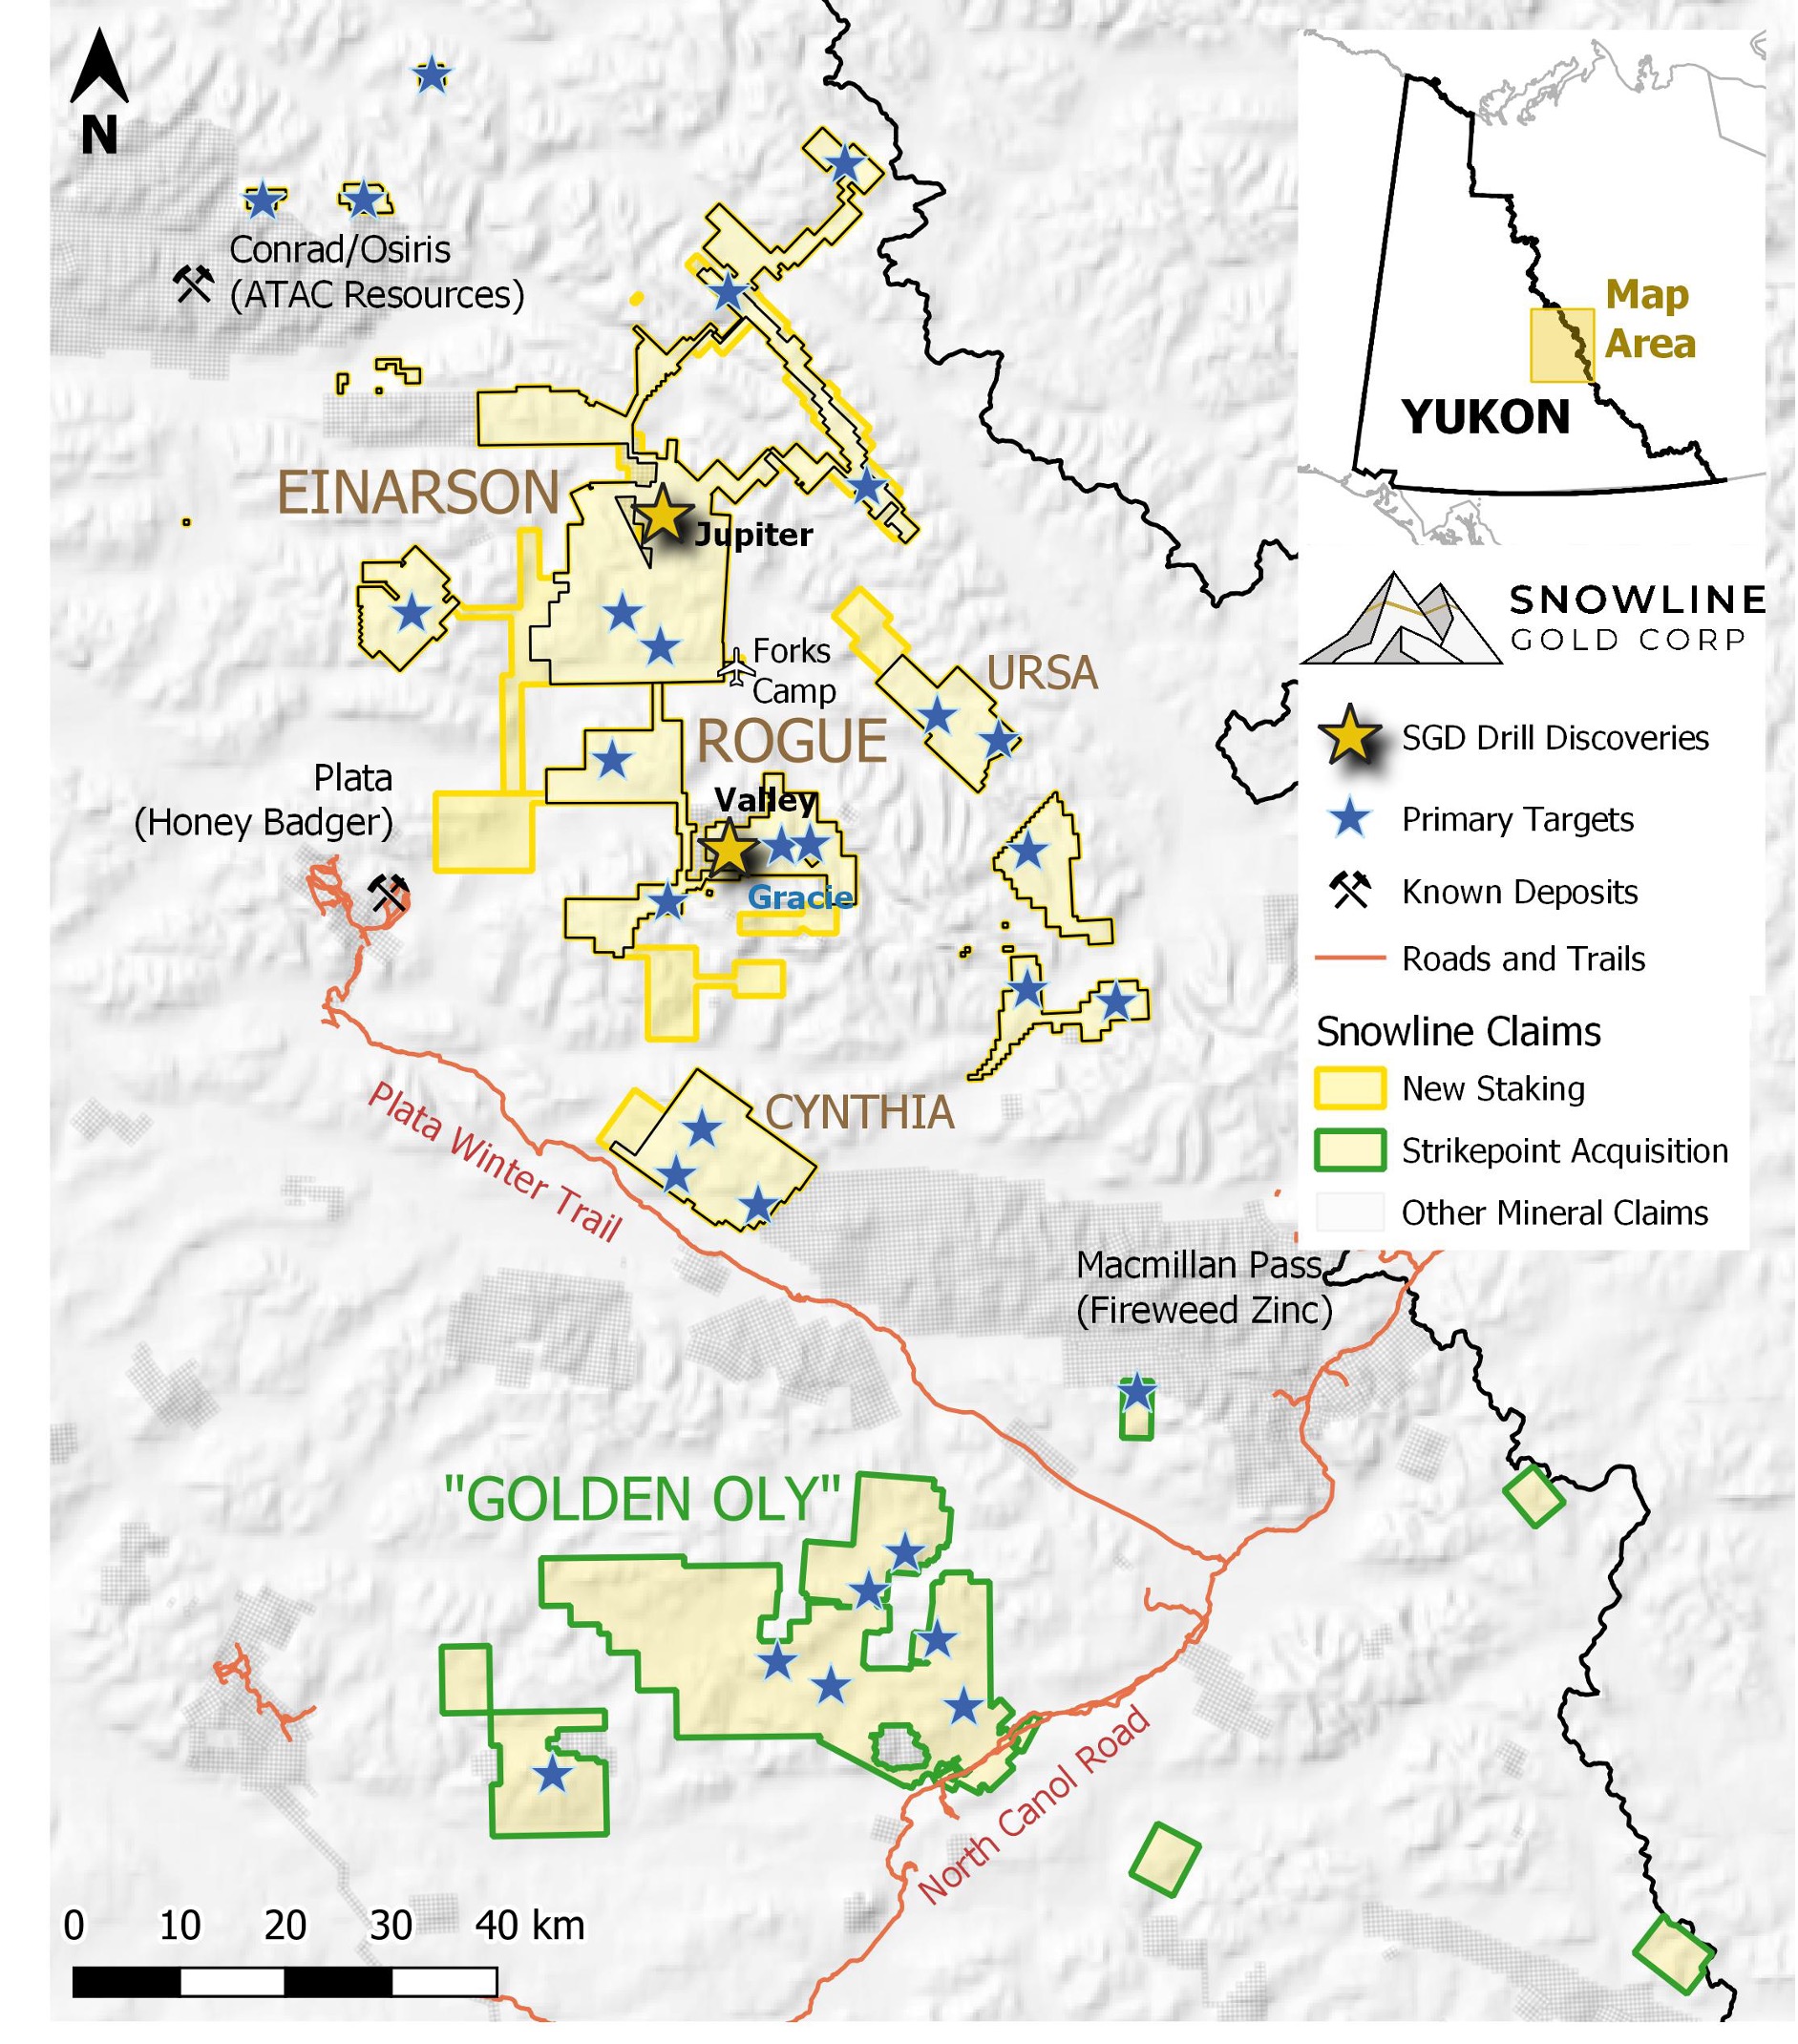 SNOWLINE GOLD DOUBLES YUKON MINERAL HOLDINGS WITH ACQUISITION OF NEARBY ...